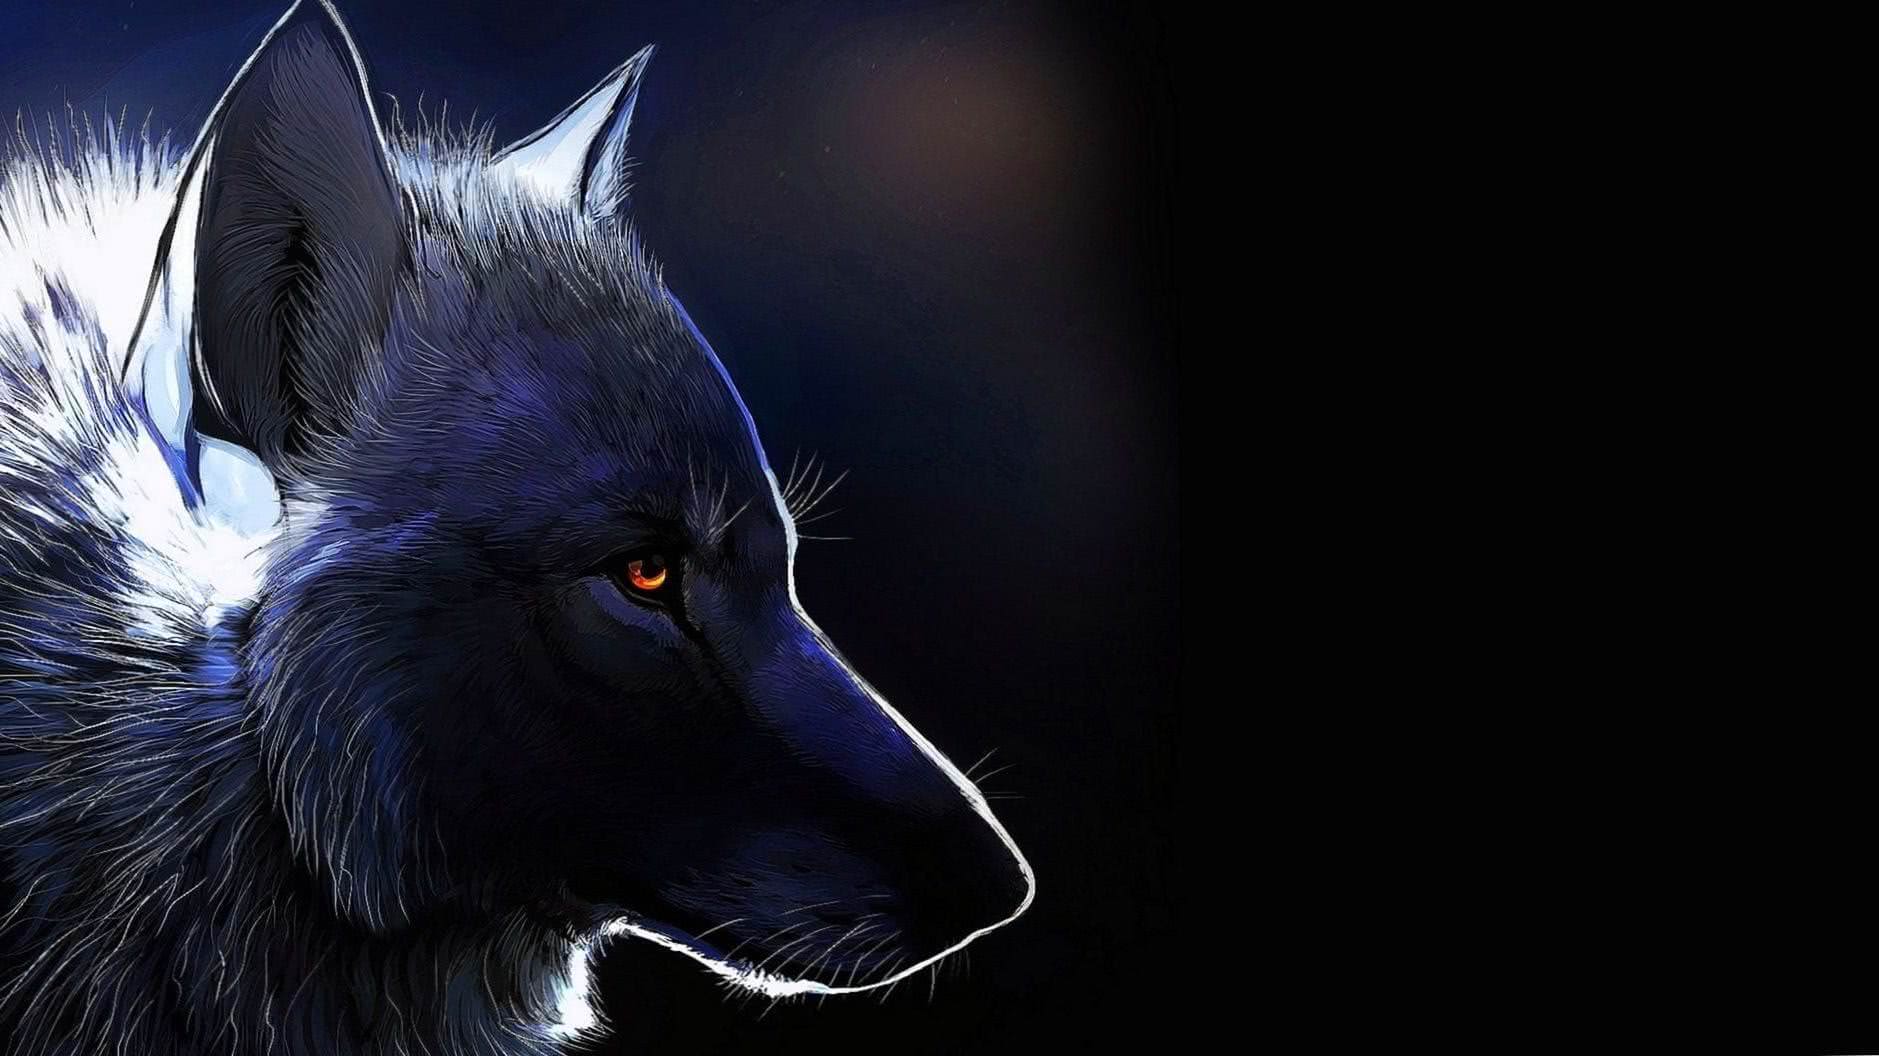 wallpaper pc hd wolf background image 3